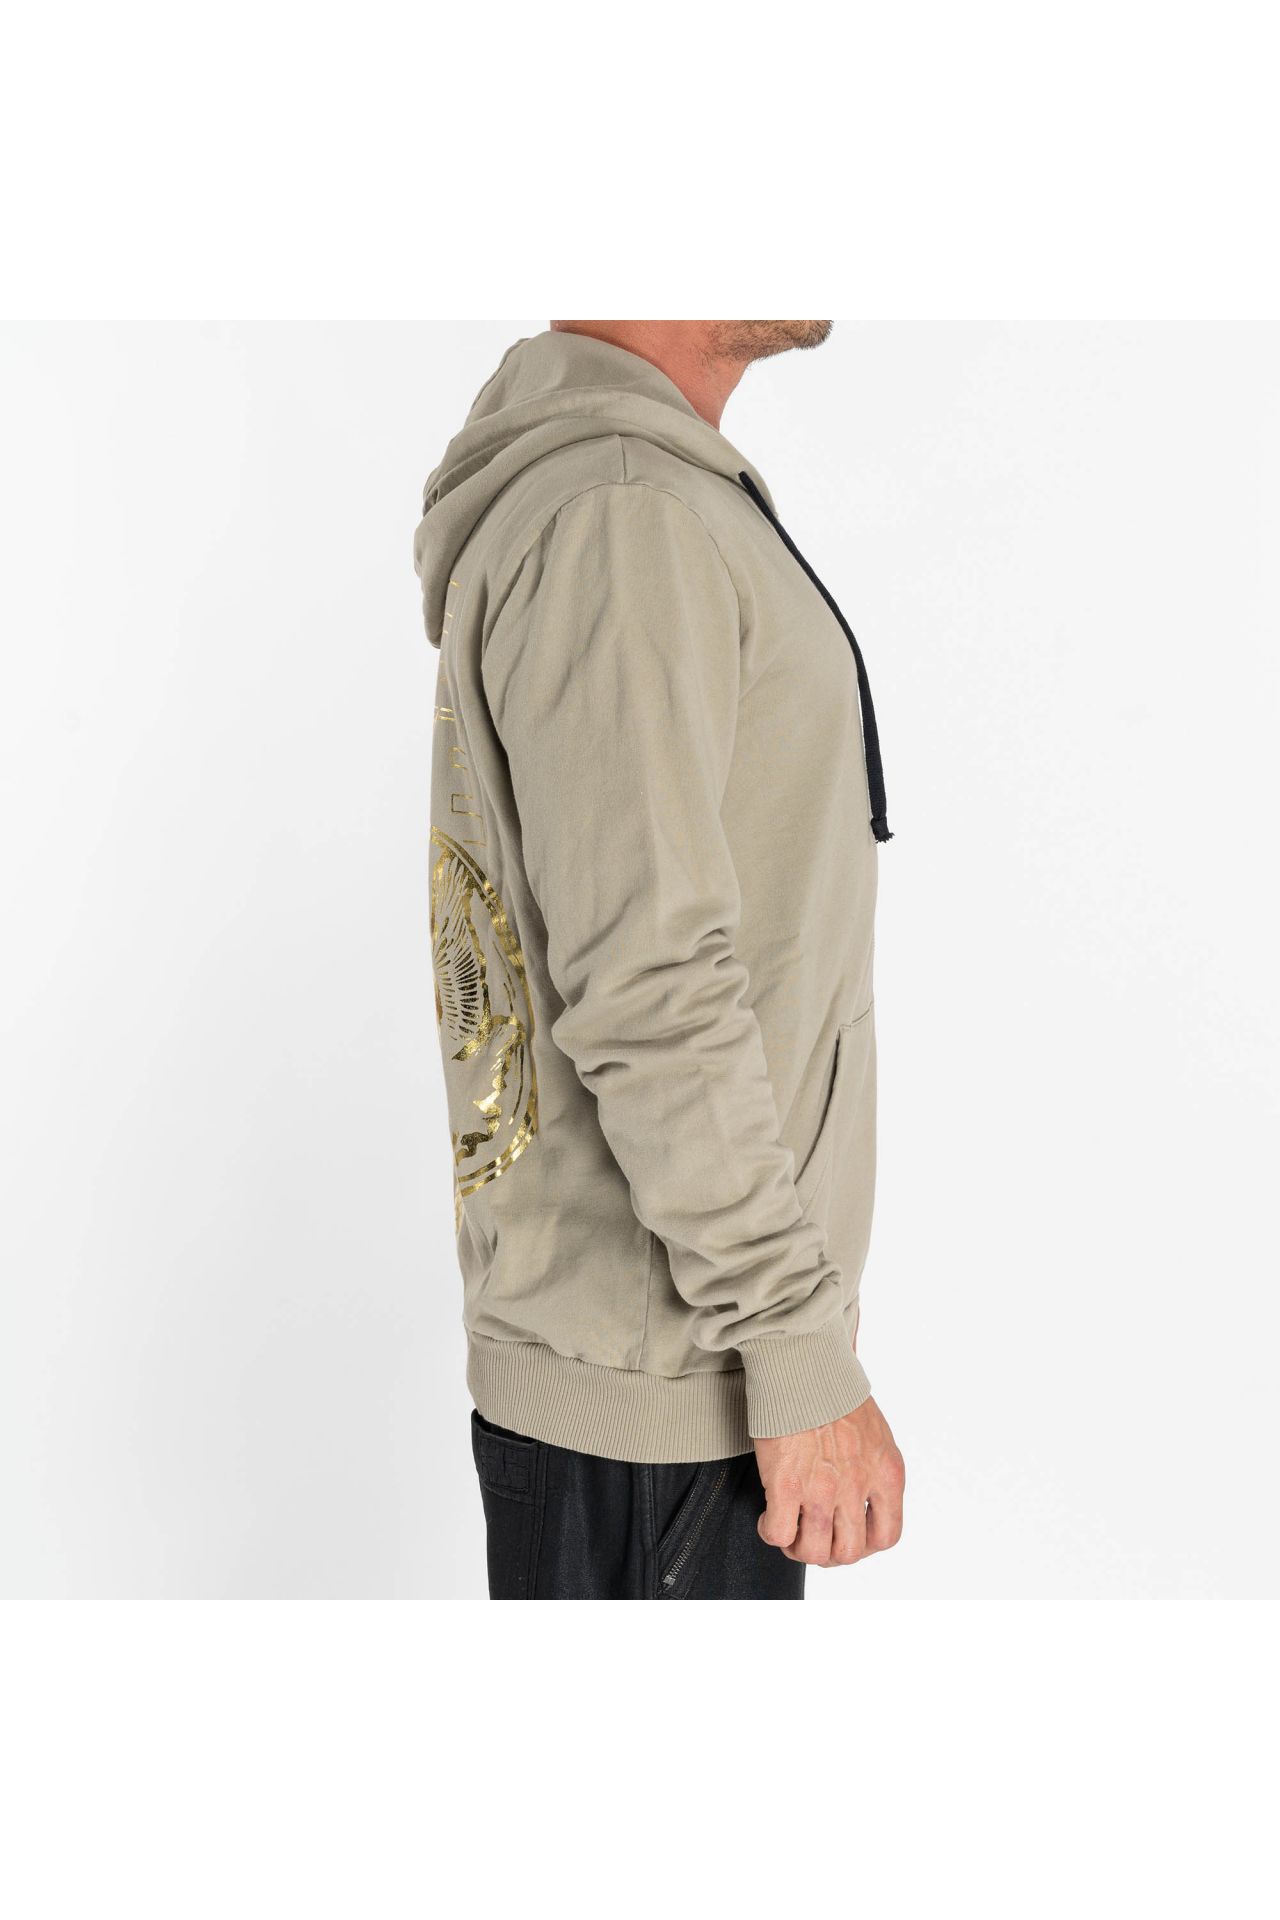 MENS LIVE FREE ZIP HOODIE IN KHAKI WITH GOLD PRINT